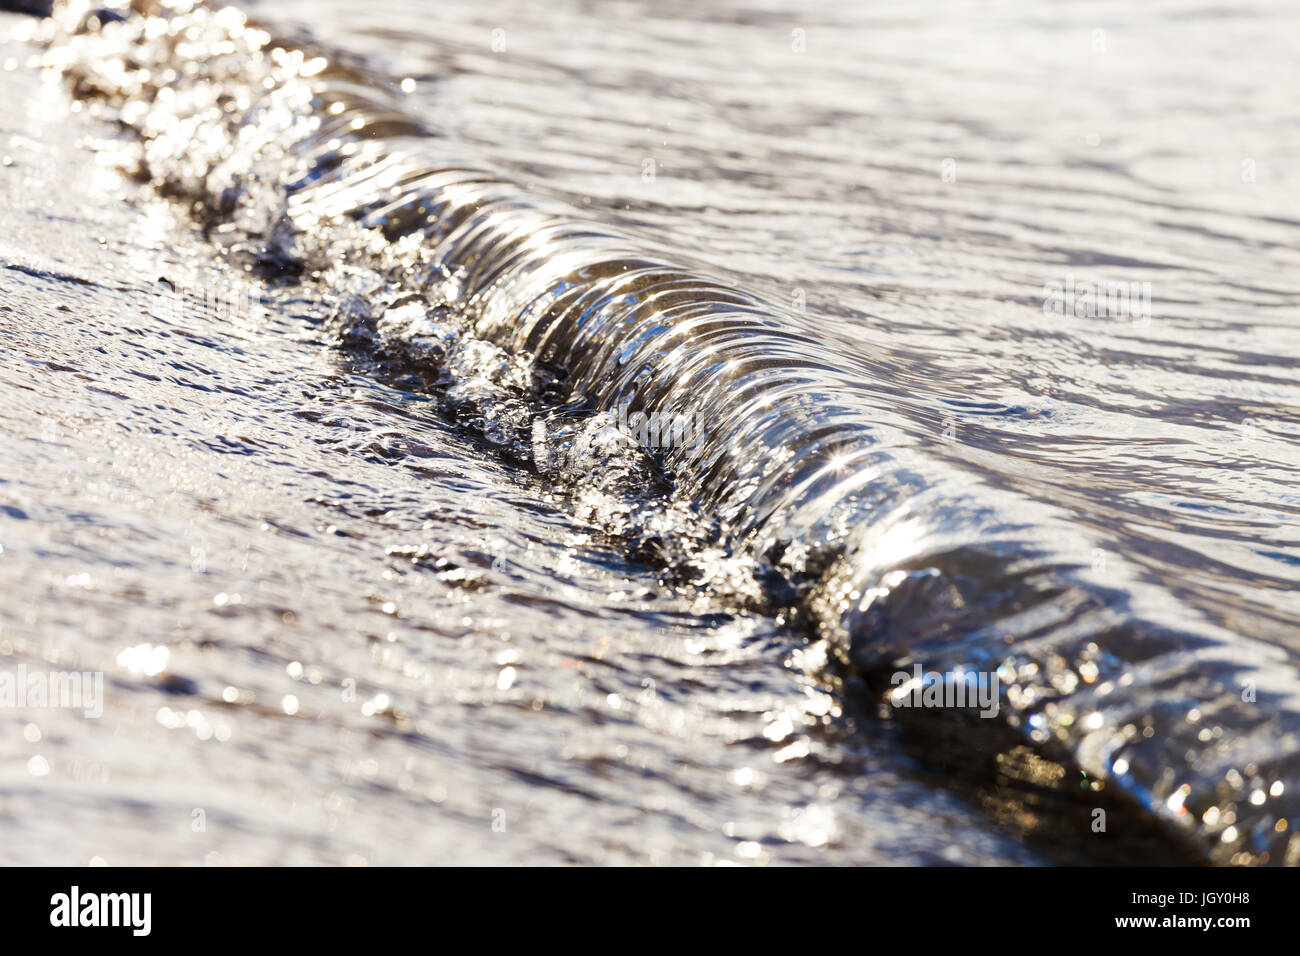 A small wave crashes on the beach in metallic morning light. Stock Photo